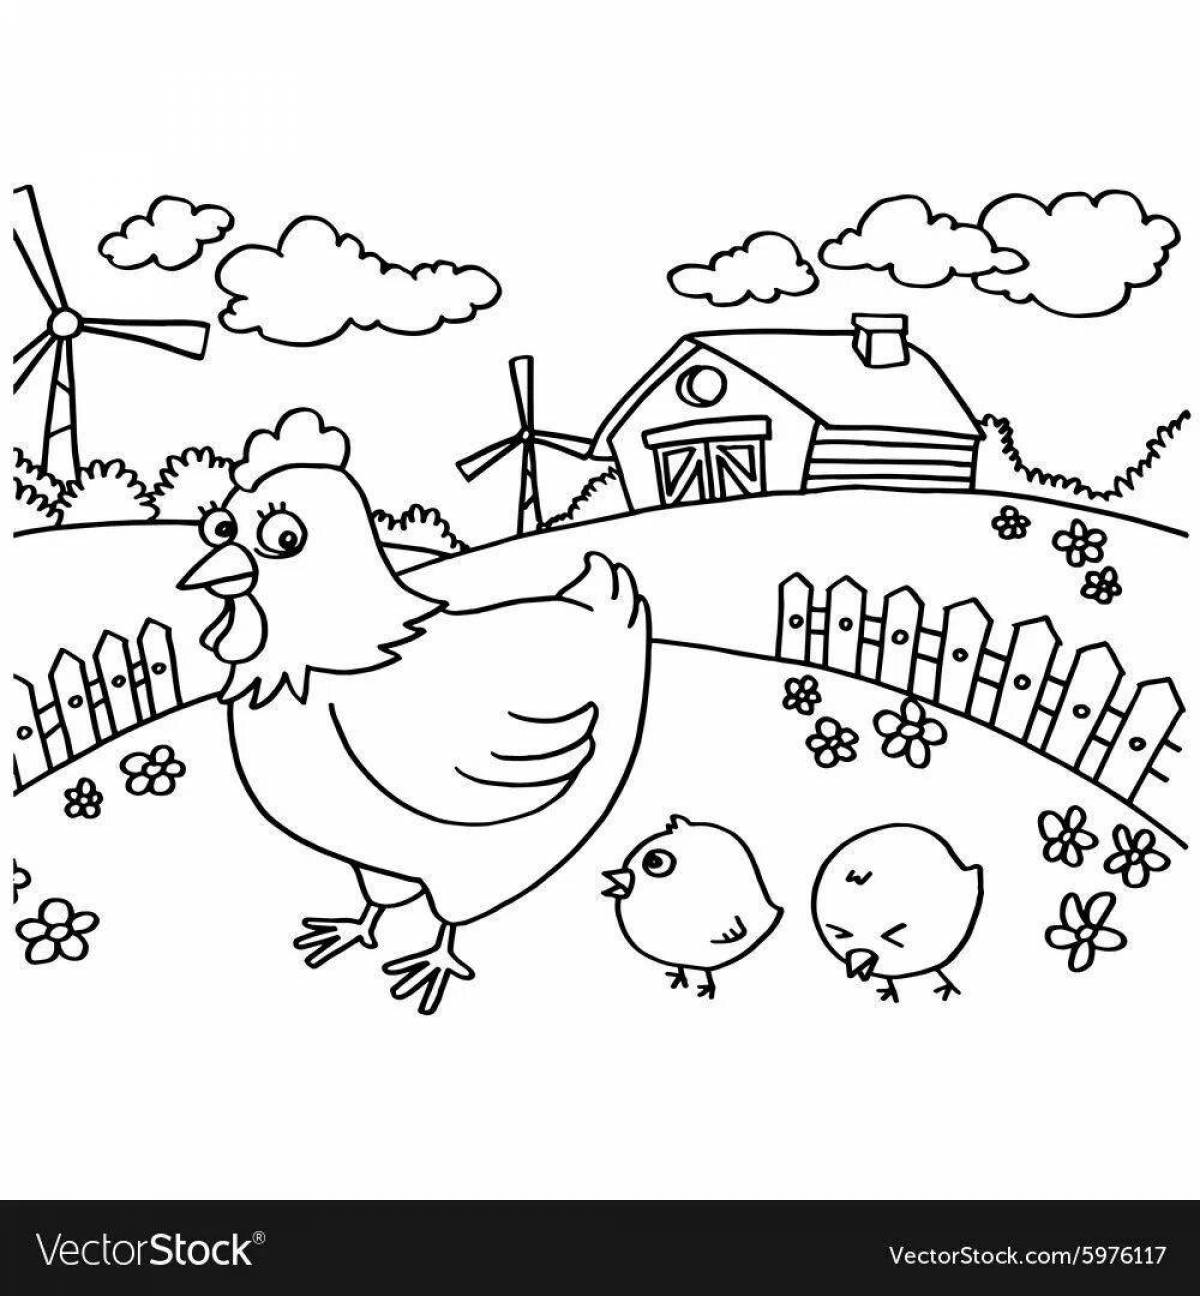 Coloring page funny chicken coop